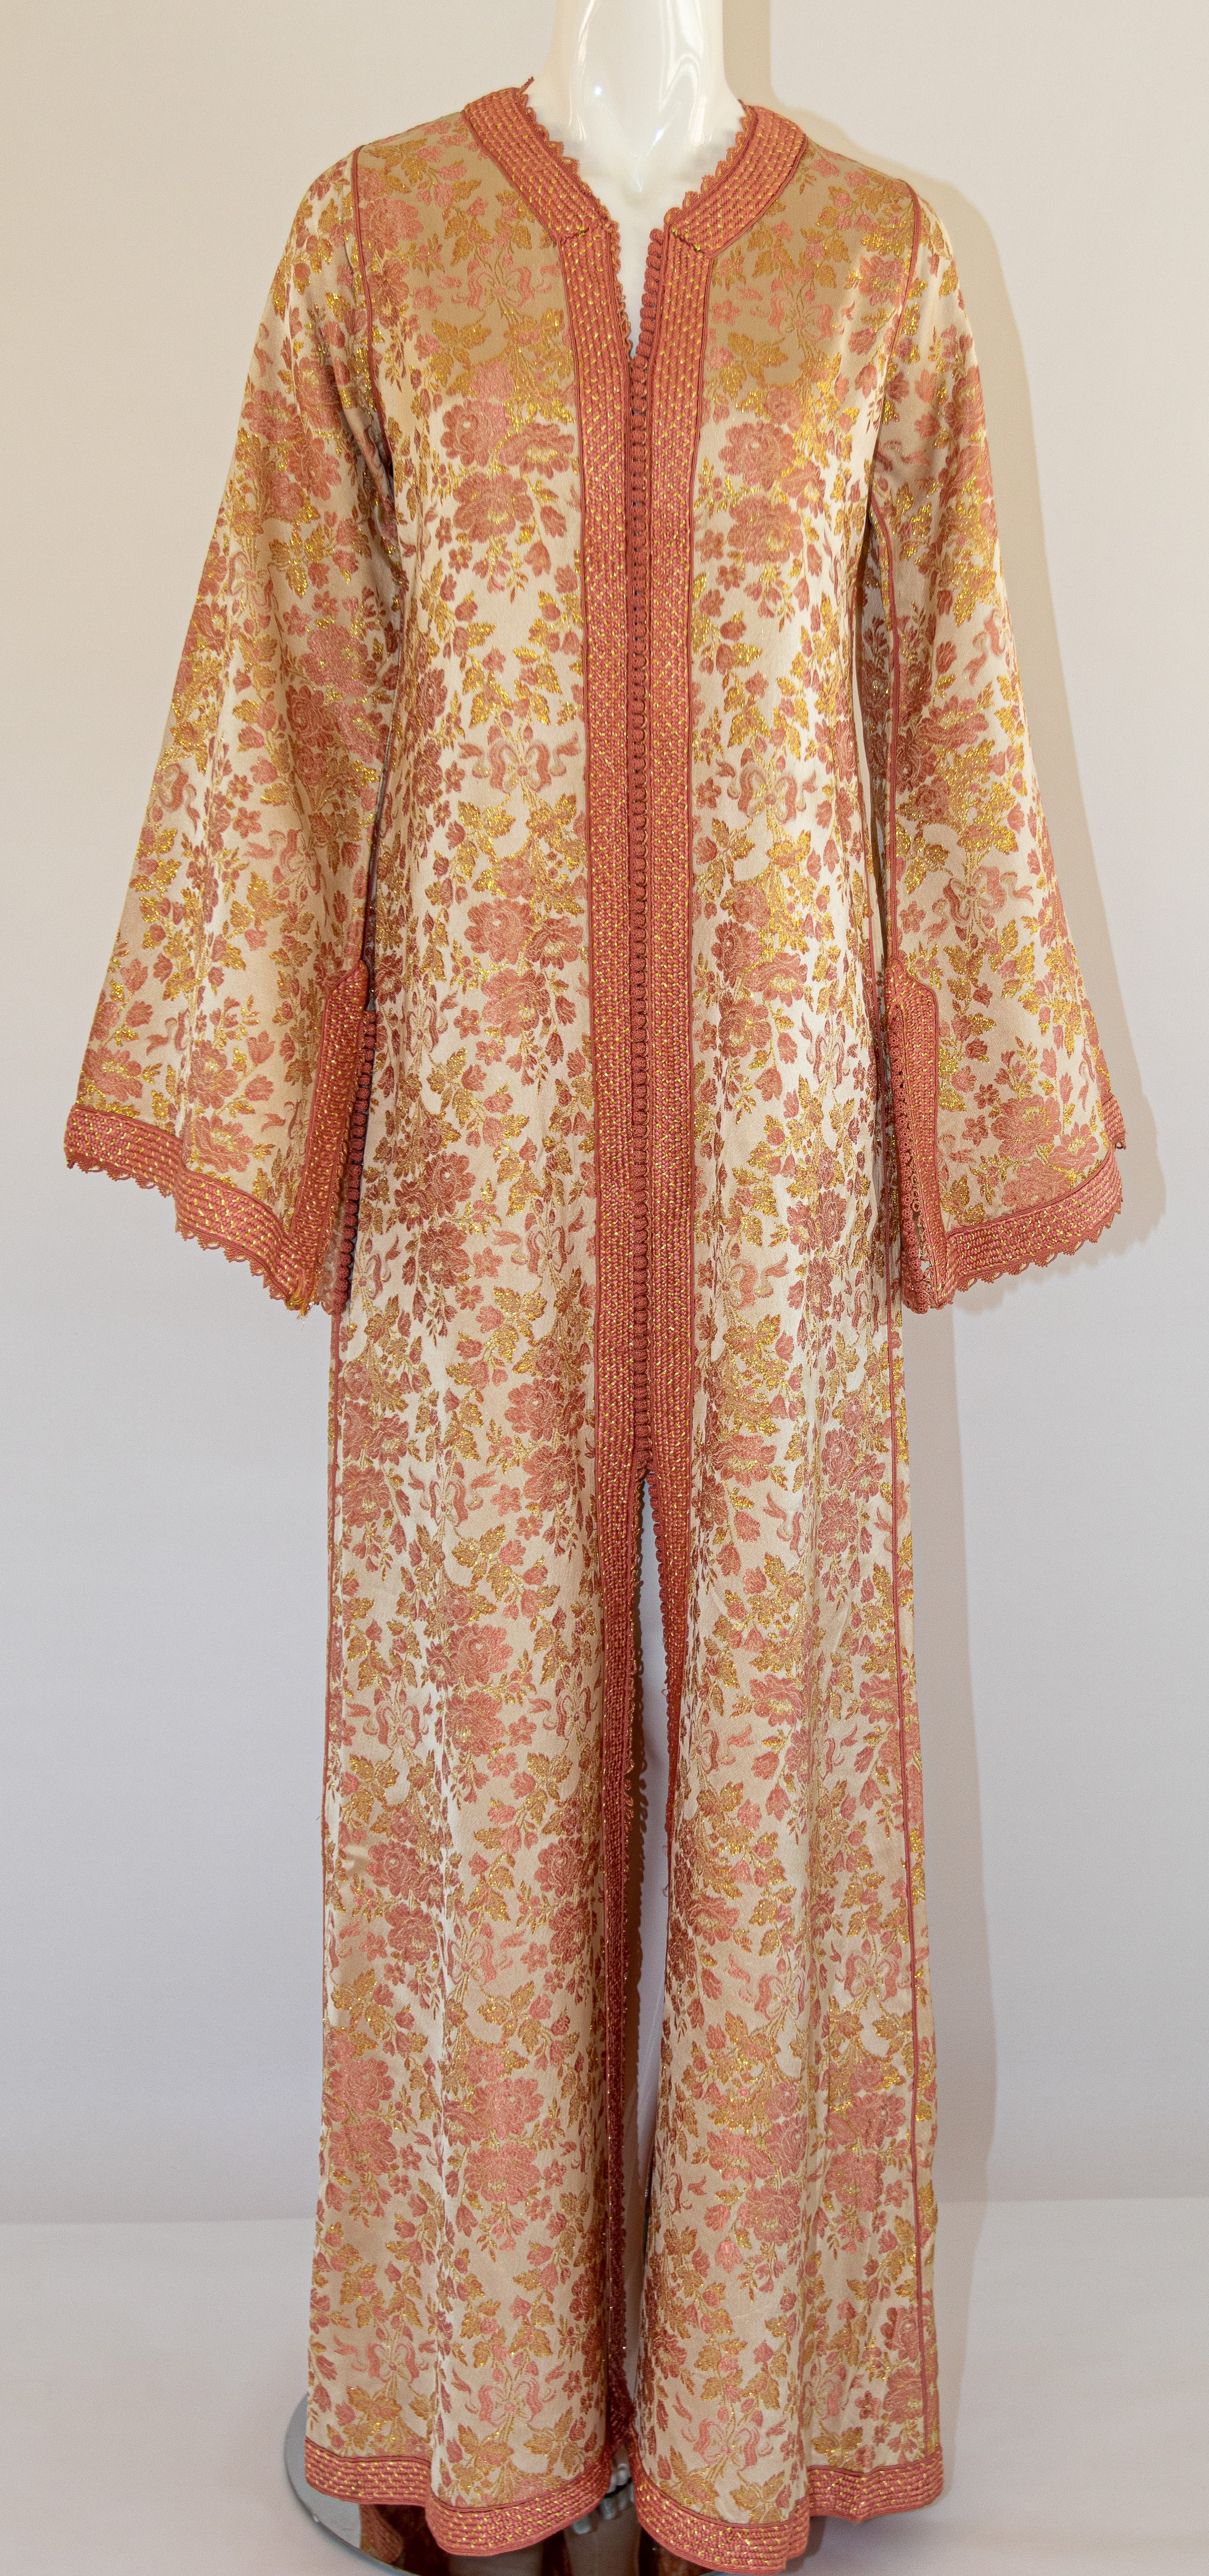 Elegant Moroccan caftan pink, peach and gold damask gorgeous vintage hostess gown.
 Floral multi-colored damask Kaftan circa 1970s.
Exotic oriental floral long maxi caftan dress with long sleeves in shimmering brocade pink and gold fabric.
This long